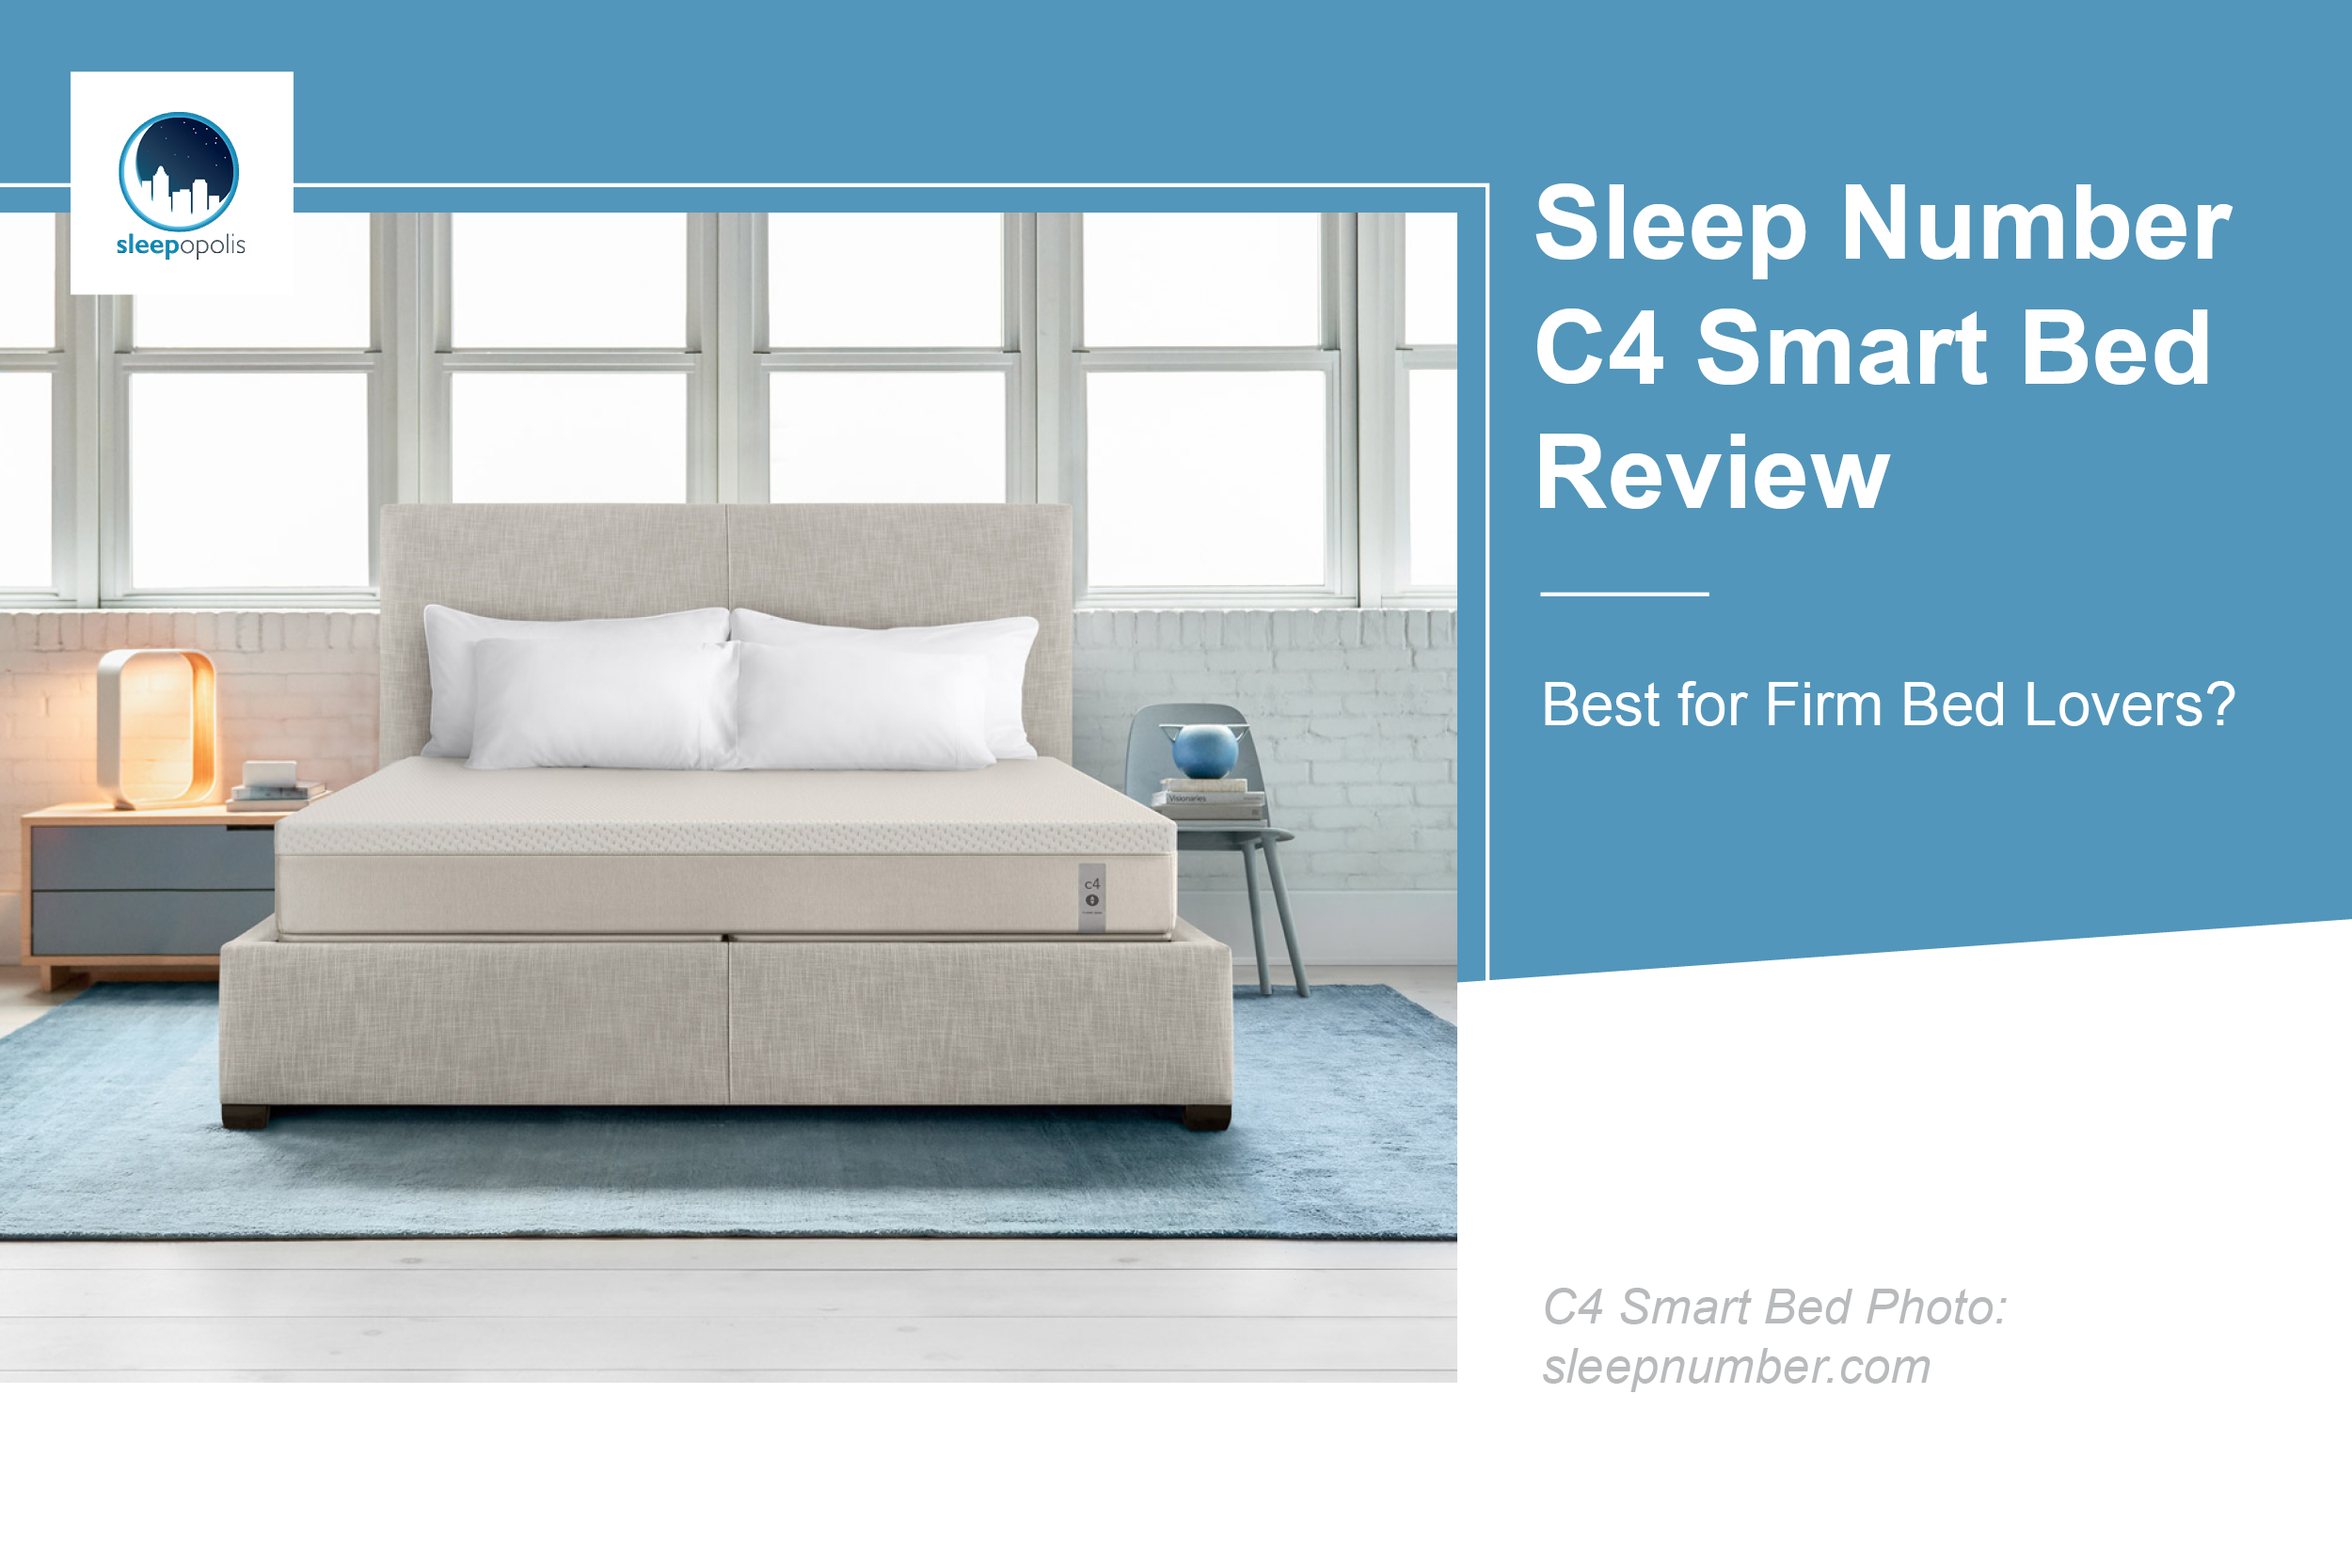 Sleep Number 360 C4 Smart Bed Review, How Much Is A King Size Sleep Number 360 Smart Bed